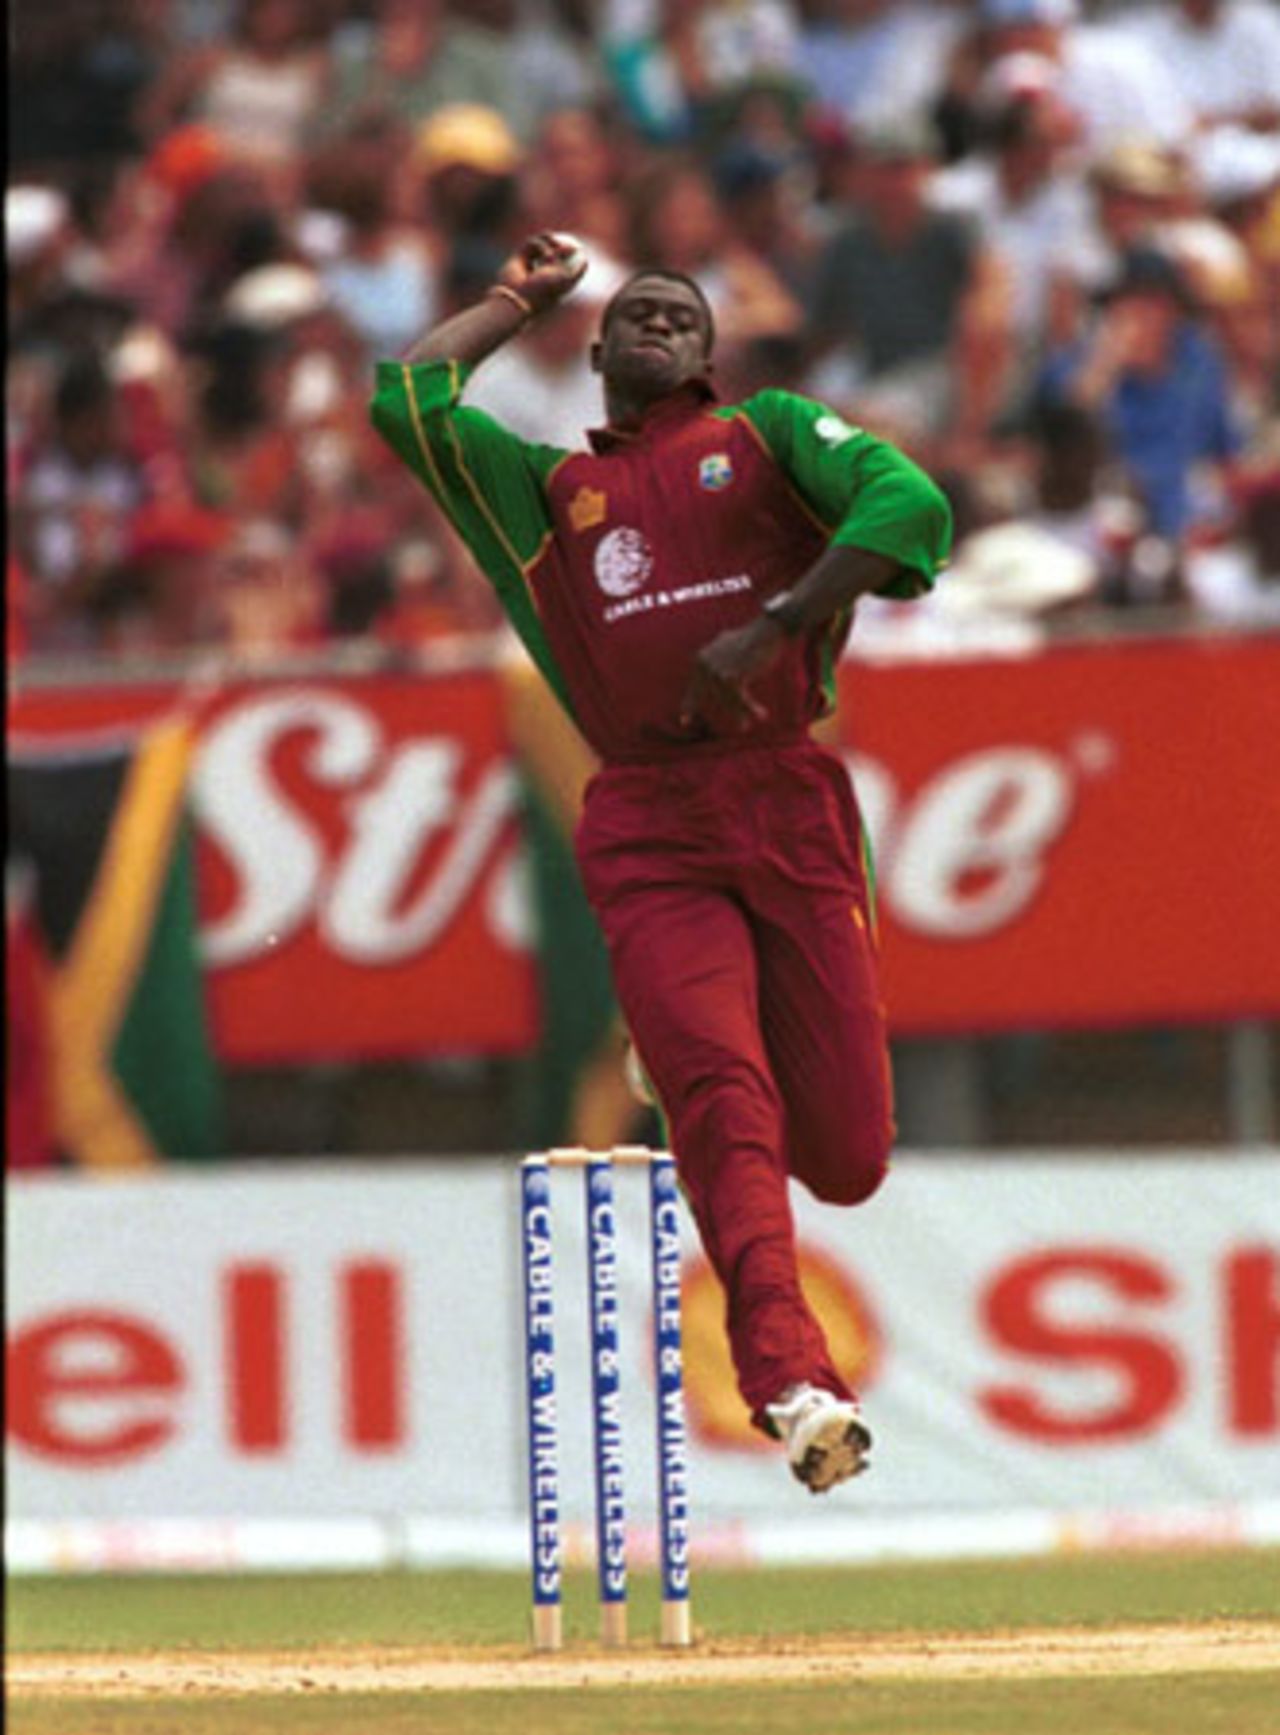 Cuffy in his final stride, West Indies v South Africa, 4th ODI at Queen's Park (New) St George's, Grenada , 6th May 2001